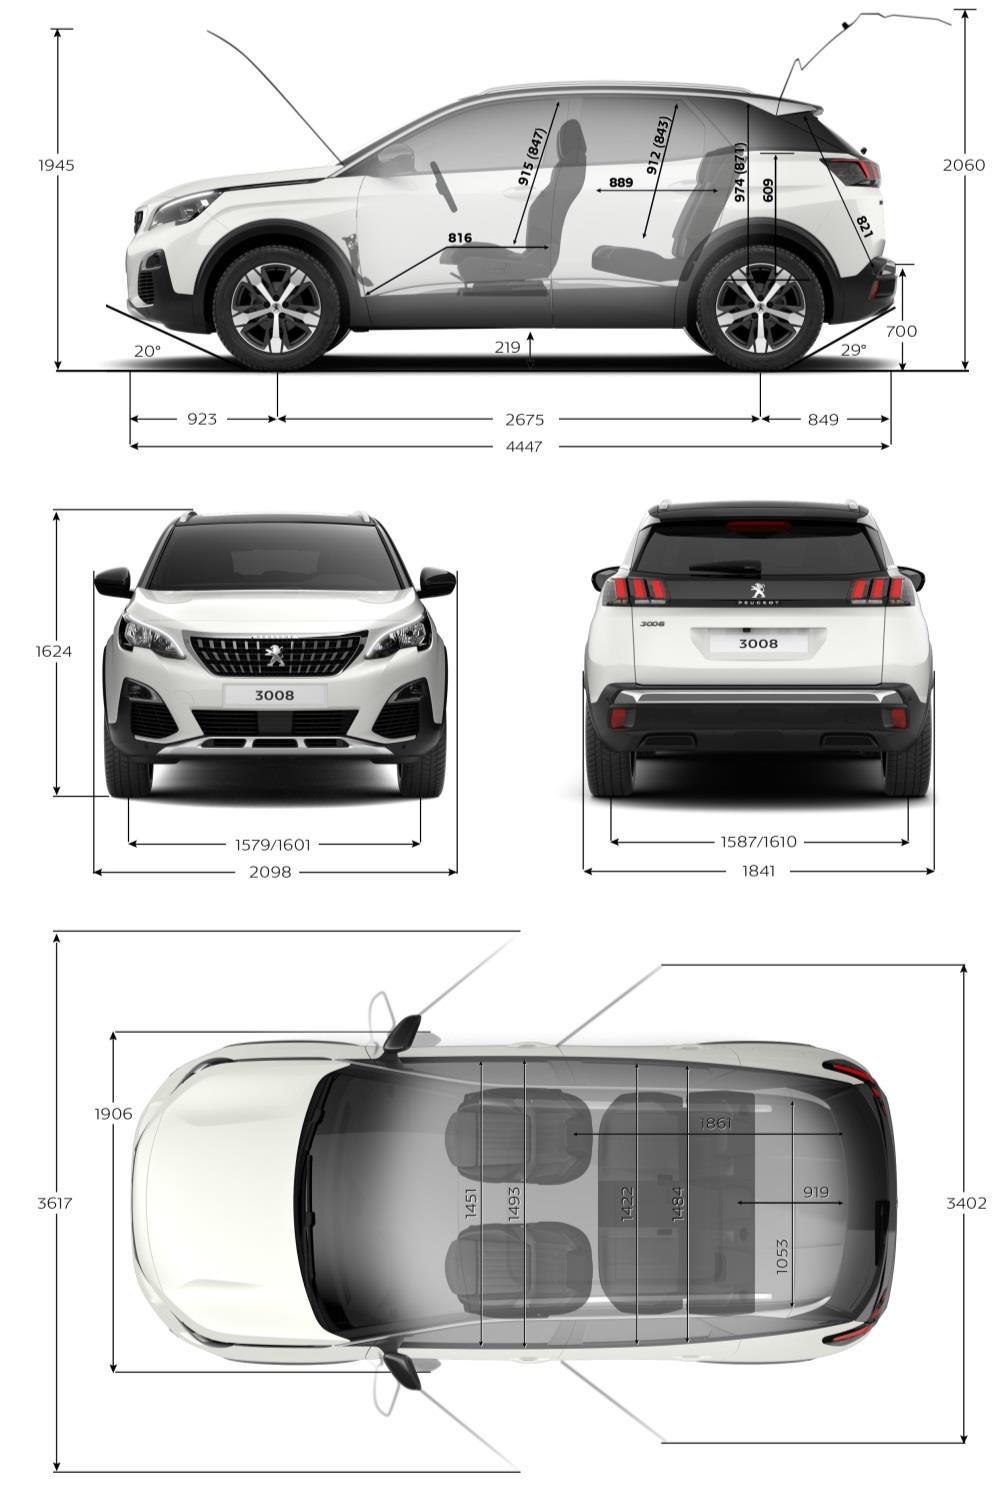 67 EXTERNAL DIMENSIONS FOR PARKING Length with boot open (mm) Width with front / rear doors open (mm) Width with door mirrors open / folded (mm) Height with bonnet open (mm) Height with boot open